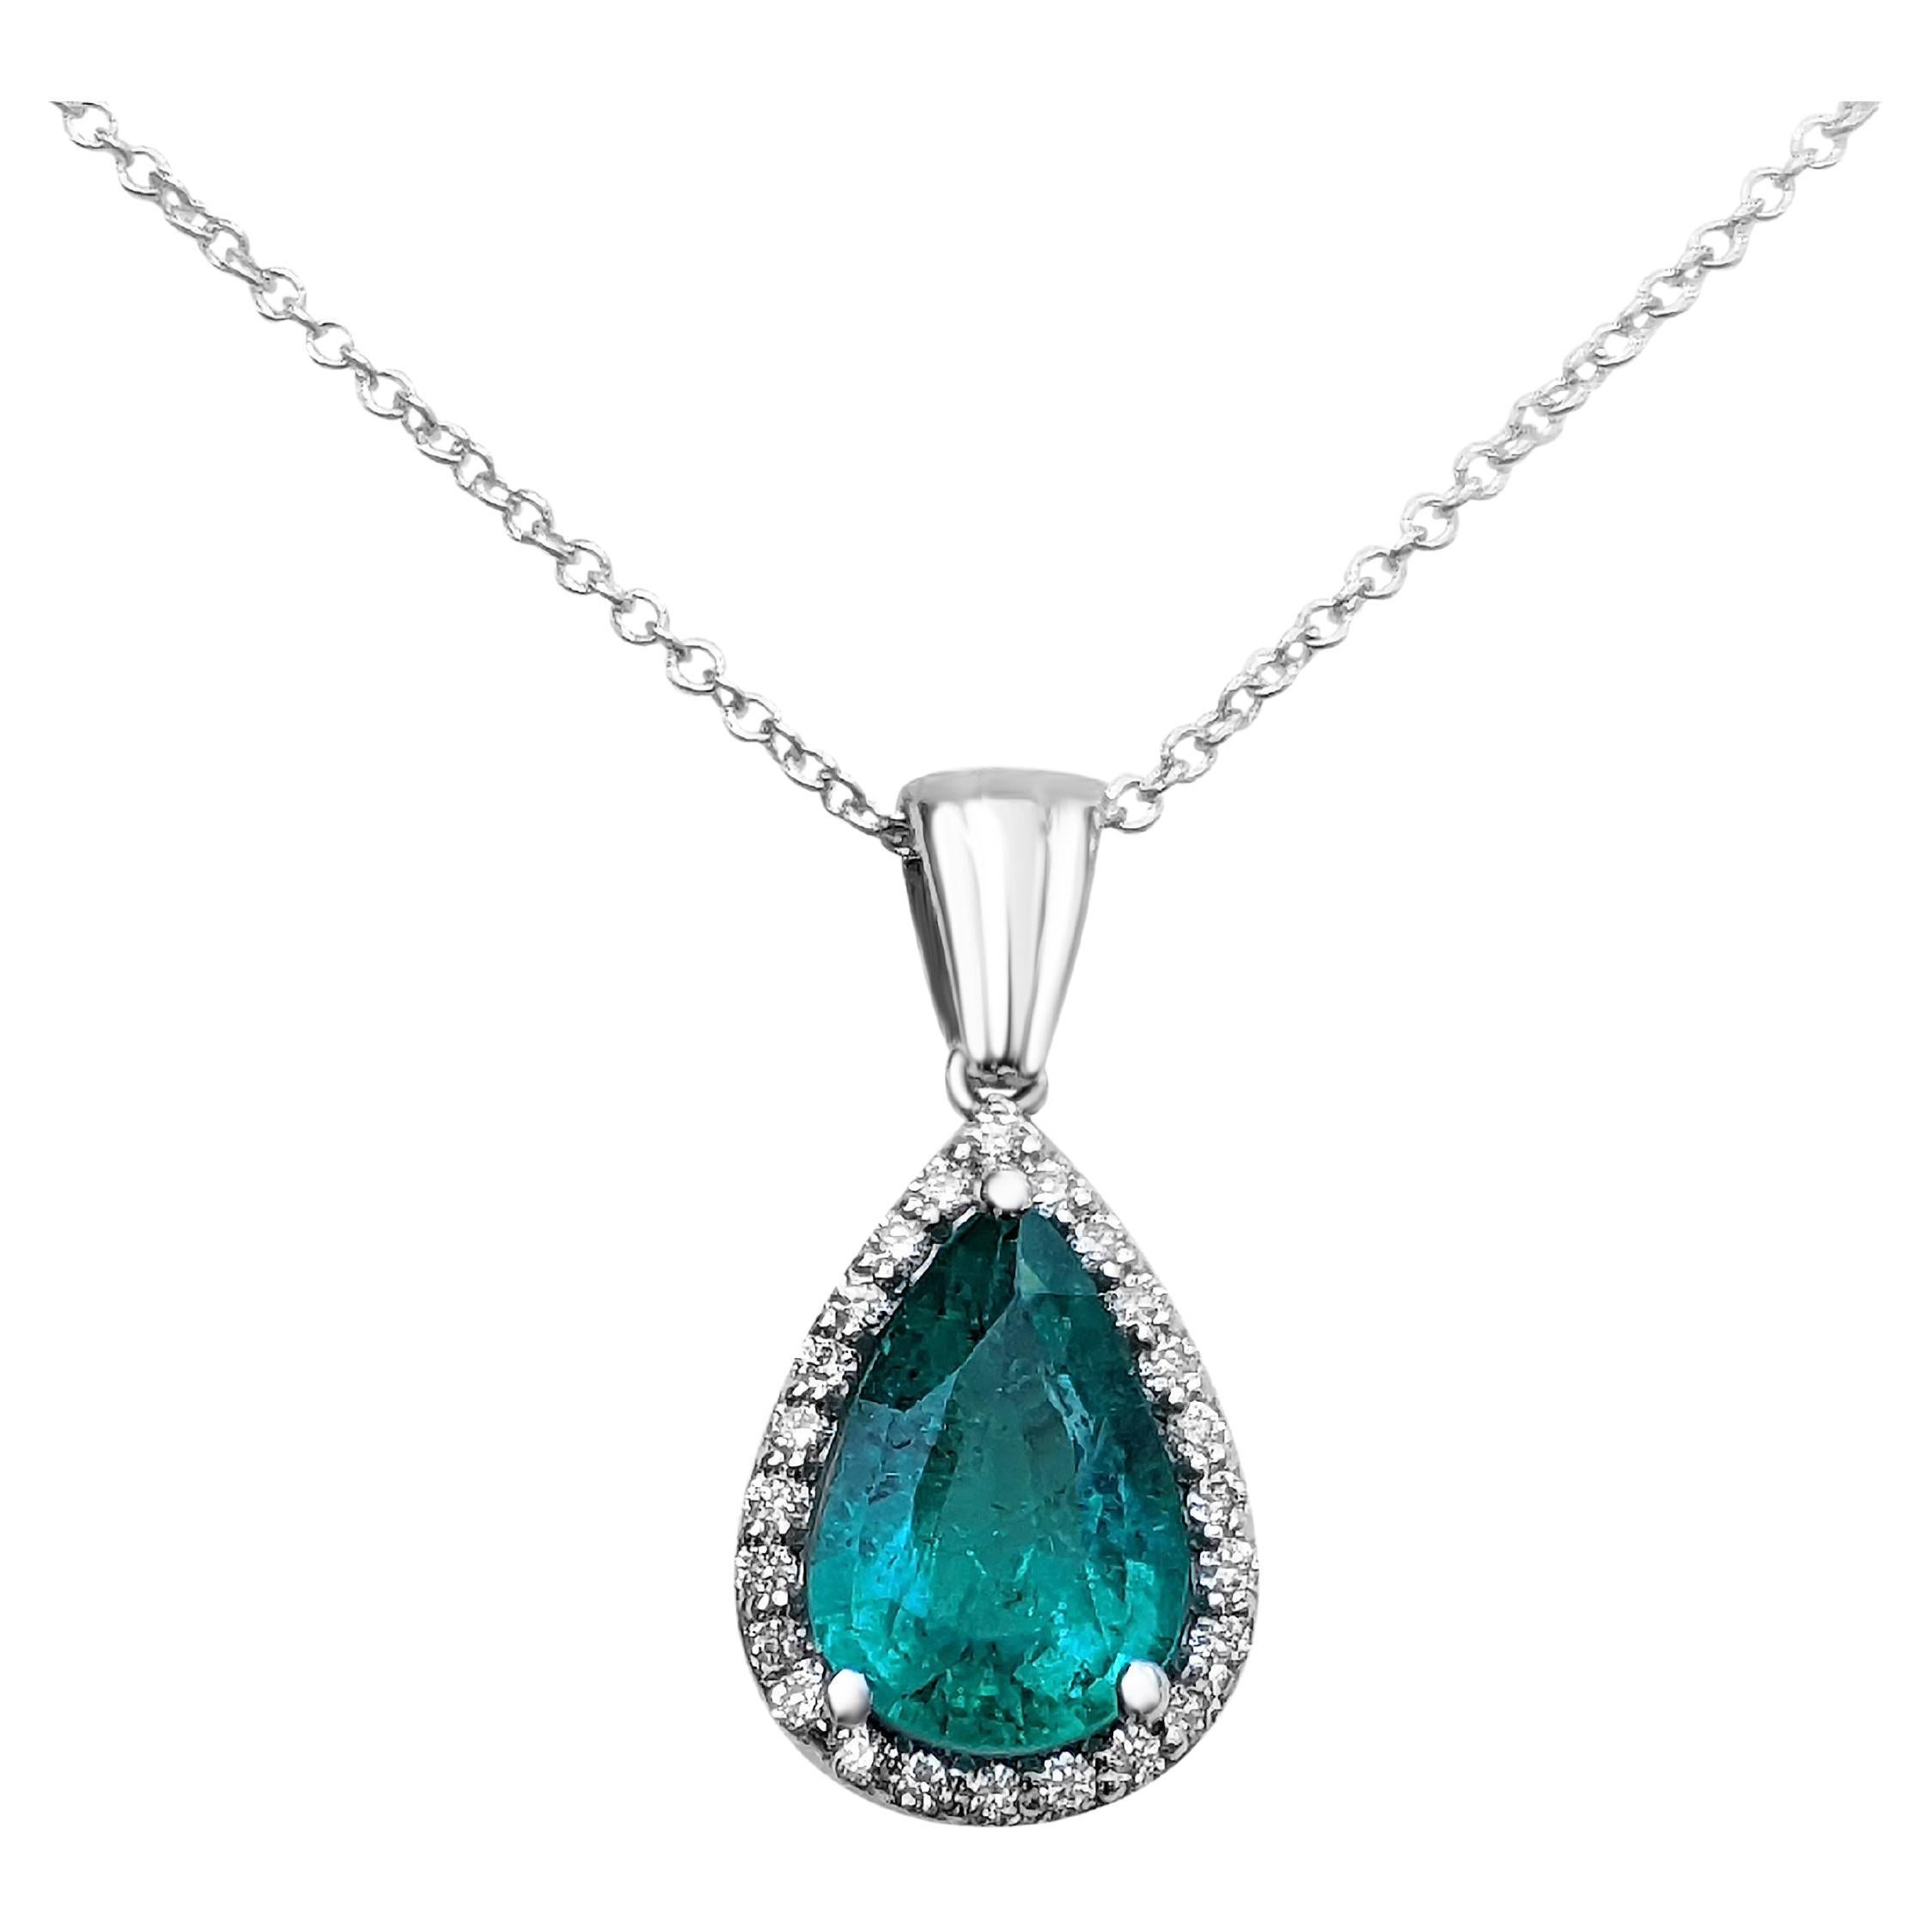 Don't miss your chance to own this unique and exquisite pendant necklace of top quality Emerald.

Center Emerald Stone:
Weight: 1.30 ct
Colour: Green
Shape: Pear Mixed

Side Stones:
0.19 cttw, F-G, VS Natural Diamonds

Item ships from Israeli